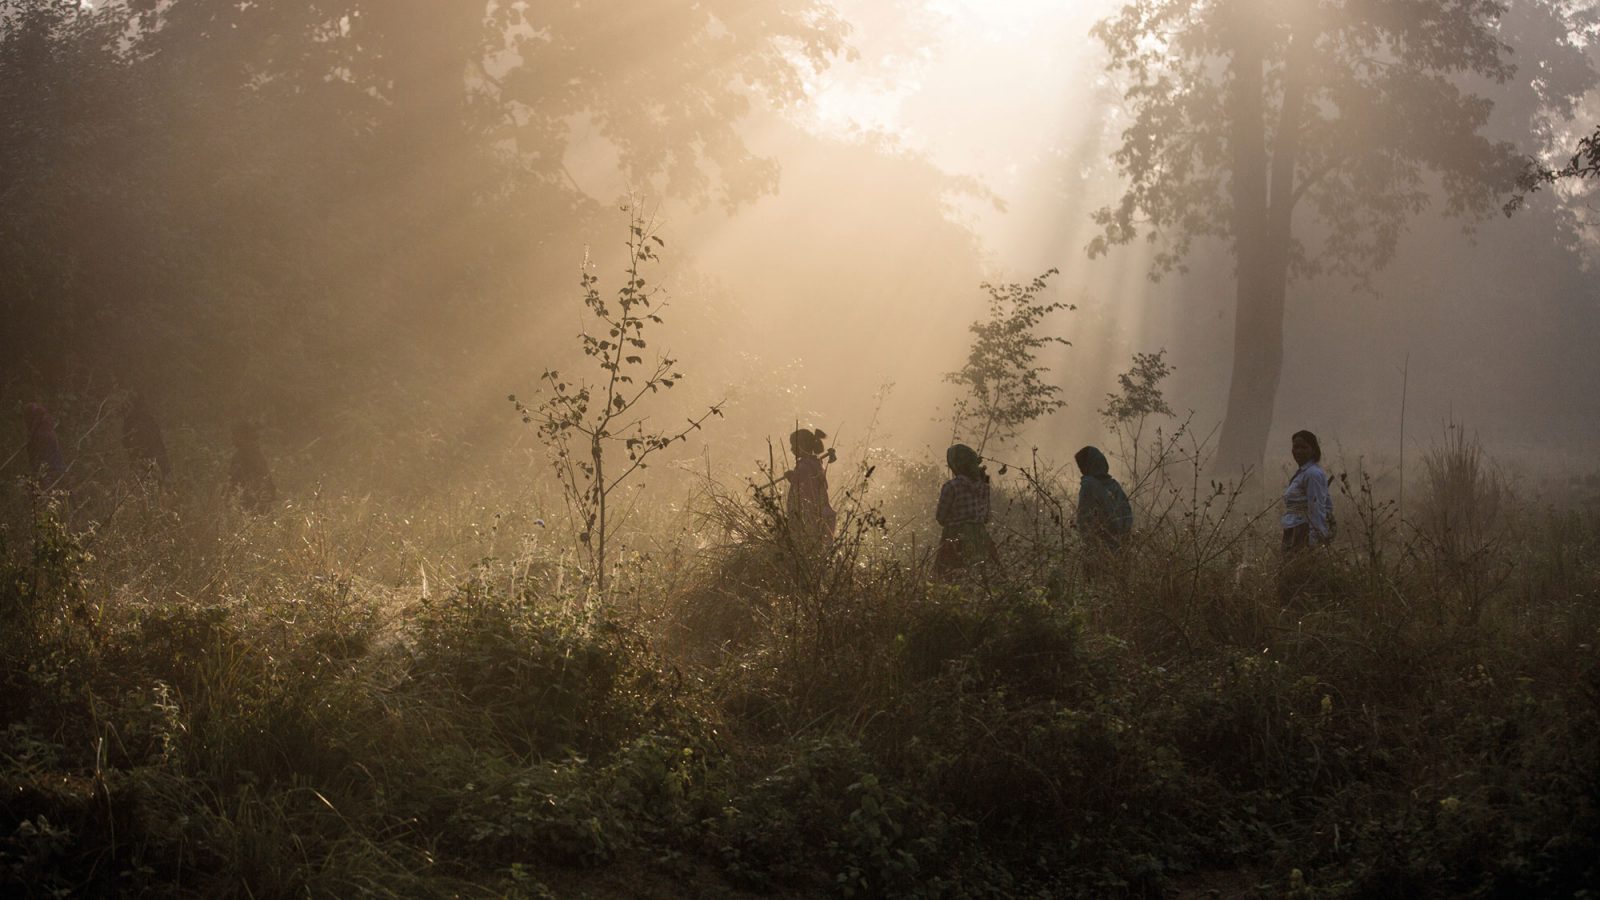 Dense tropical forest at sunrise, a group of women carrying tools walking through it.